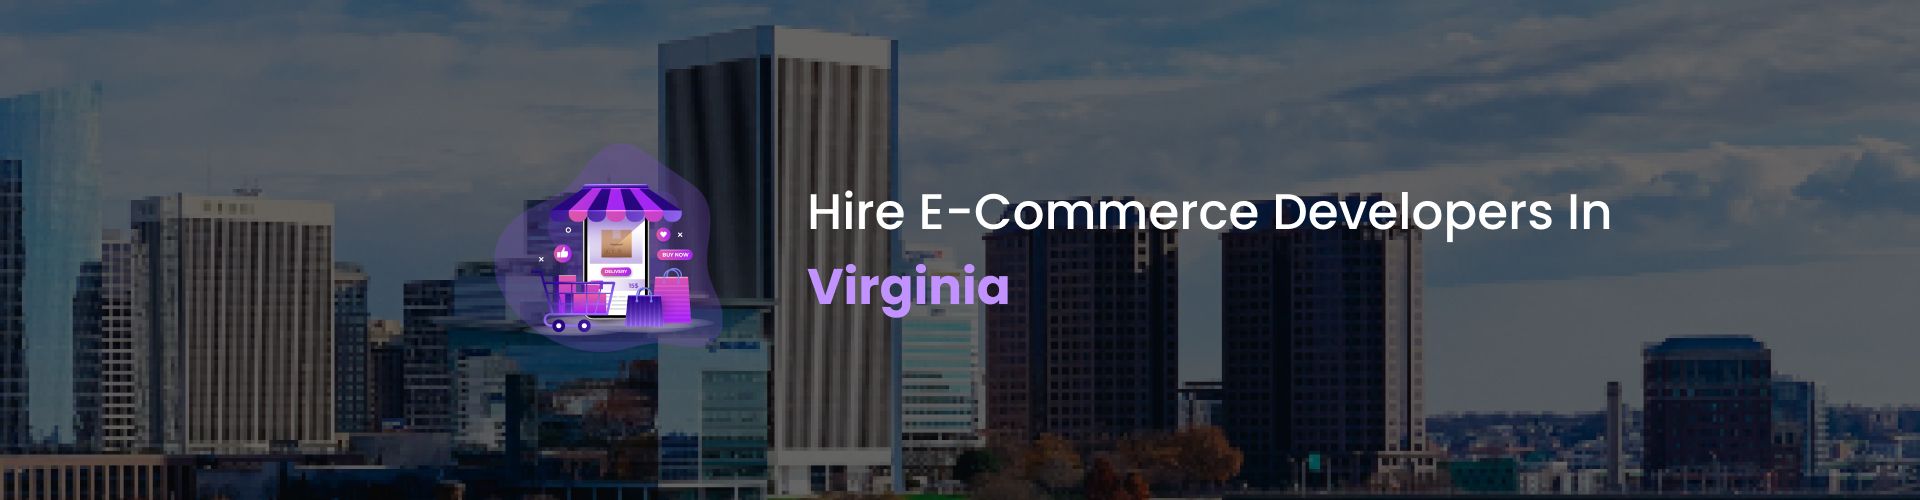 hire ecommerce developers in virginia